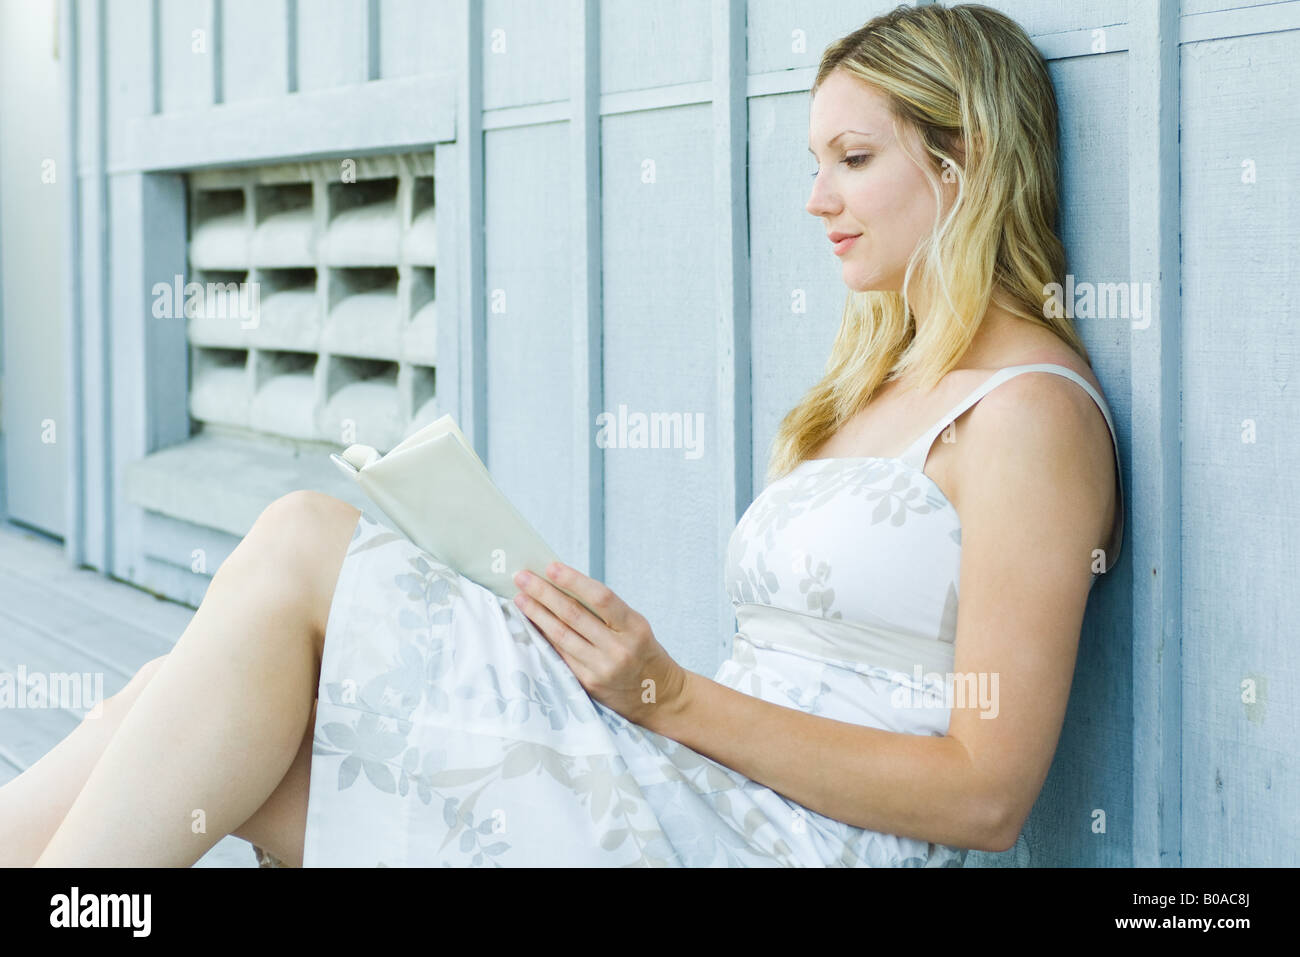 Young woman sitting outdoors, reading book, side view Stock Photo